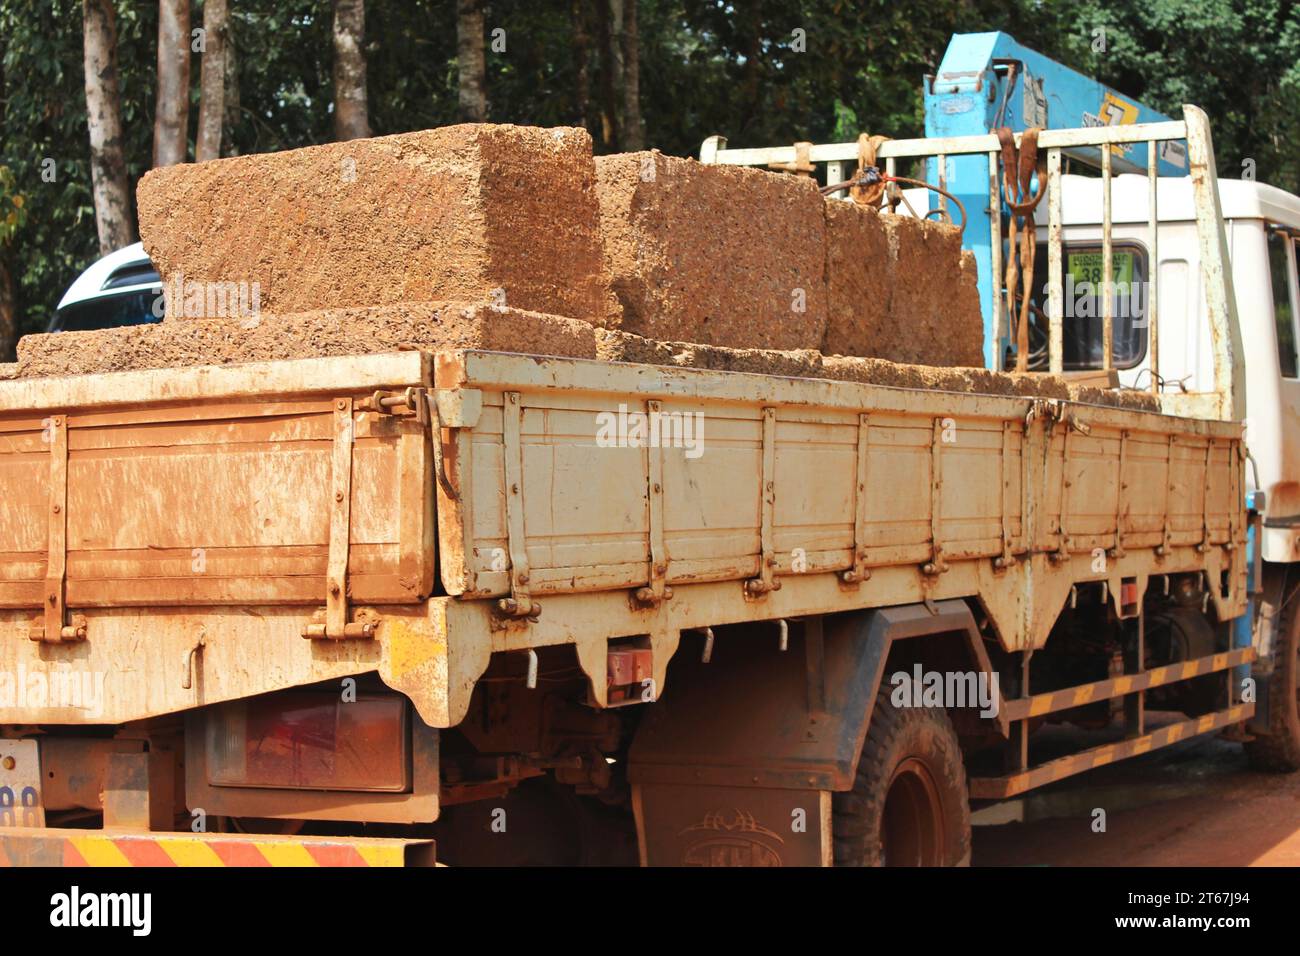 Truckload of large laterite building blocks to be used for repair and restoration projects at the Angkor Archaeological Park, near Siem Reap, Cambodia Stock Photo